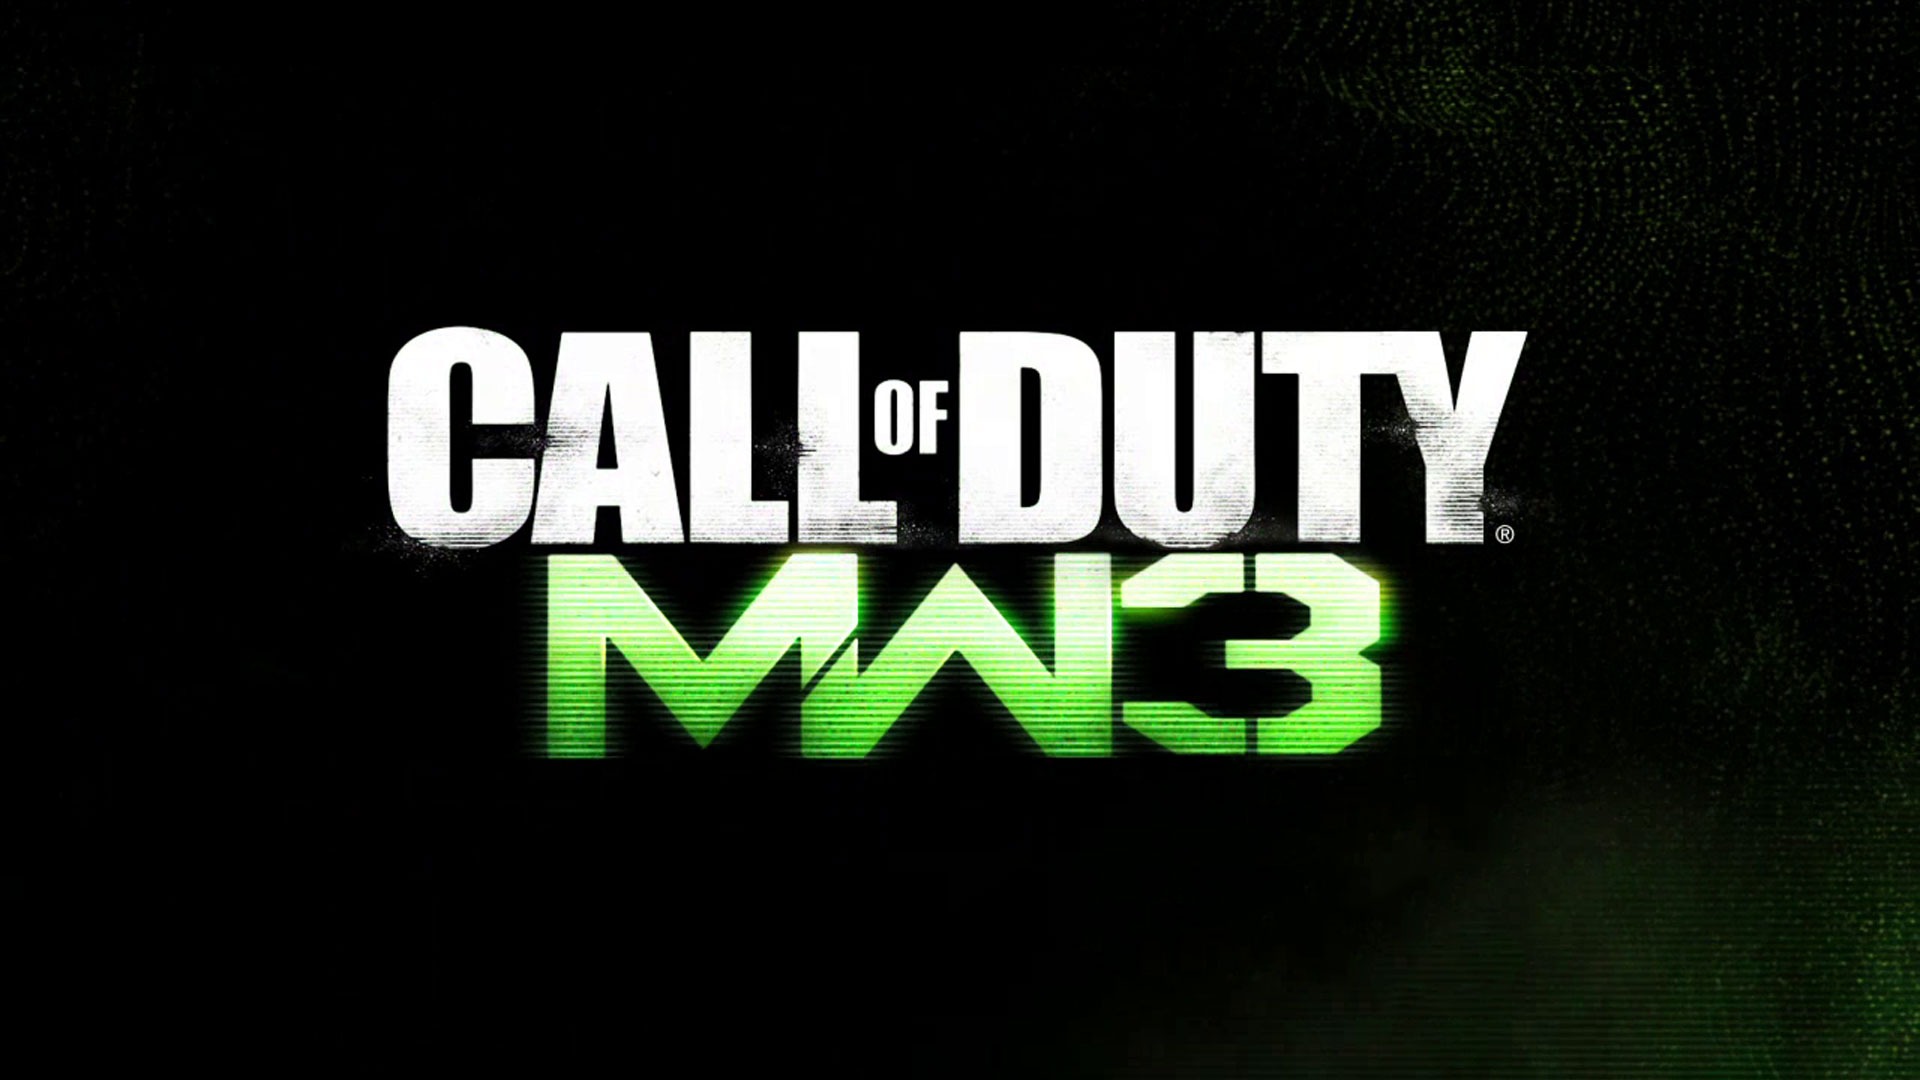 Call of Duty: MW3 wallpapers HD #9 - 1920x1080